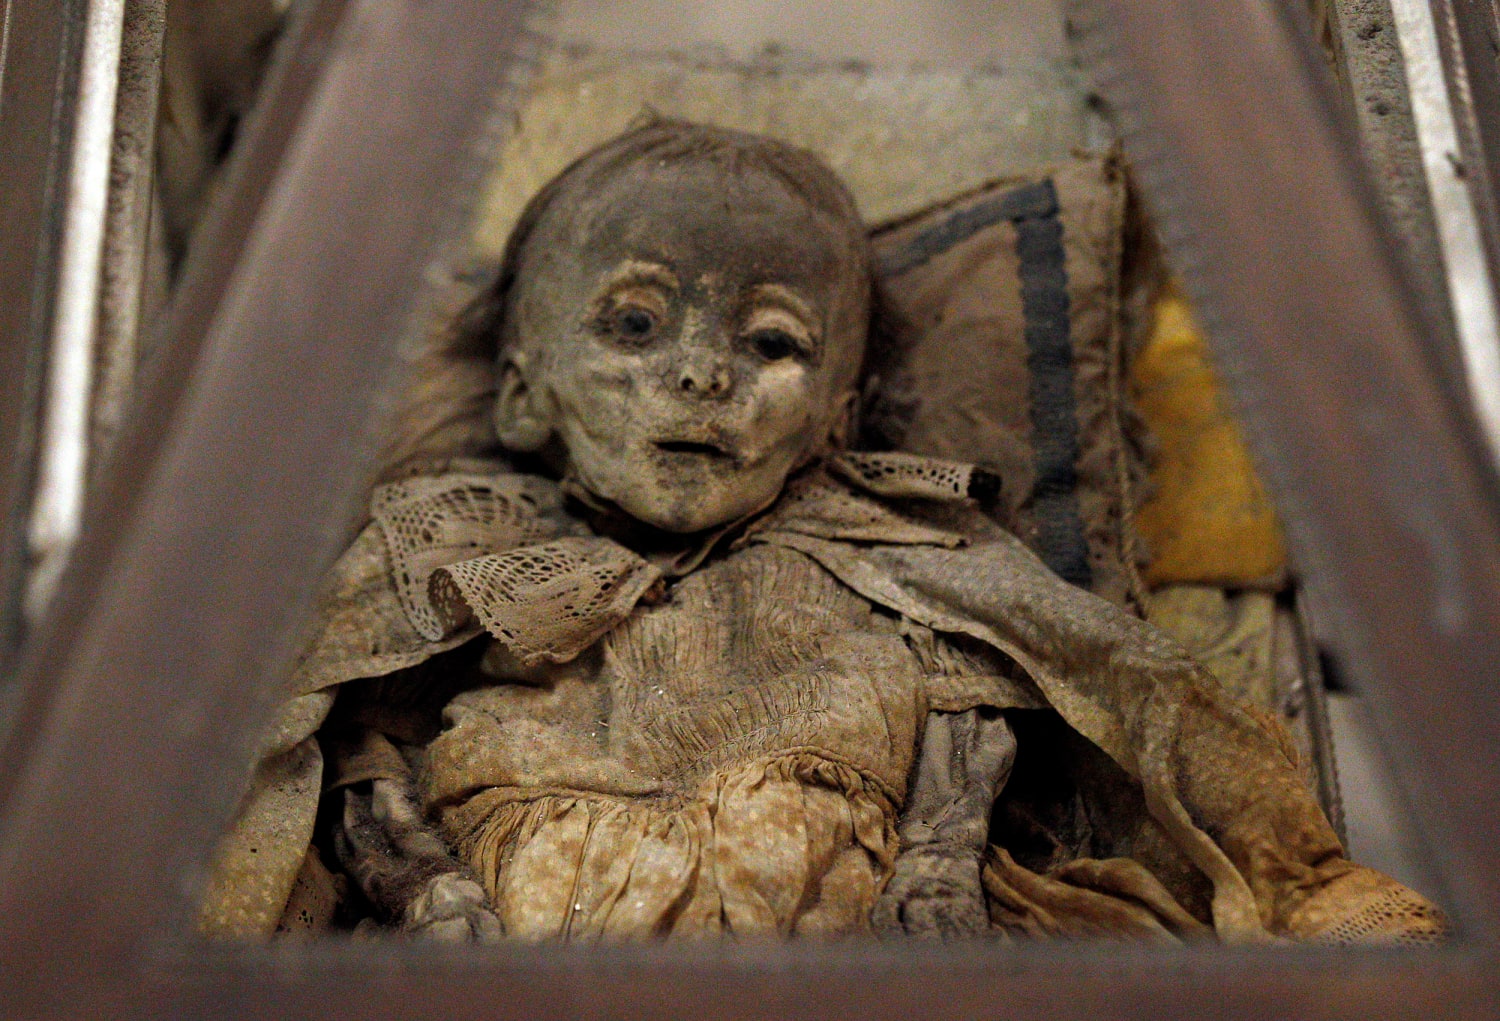 Secrets of Sicily’s child mummies to be unearthed in new study